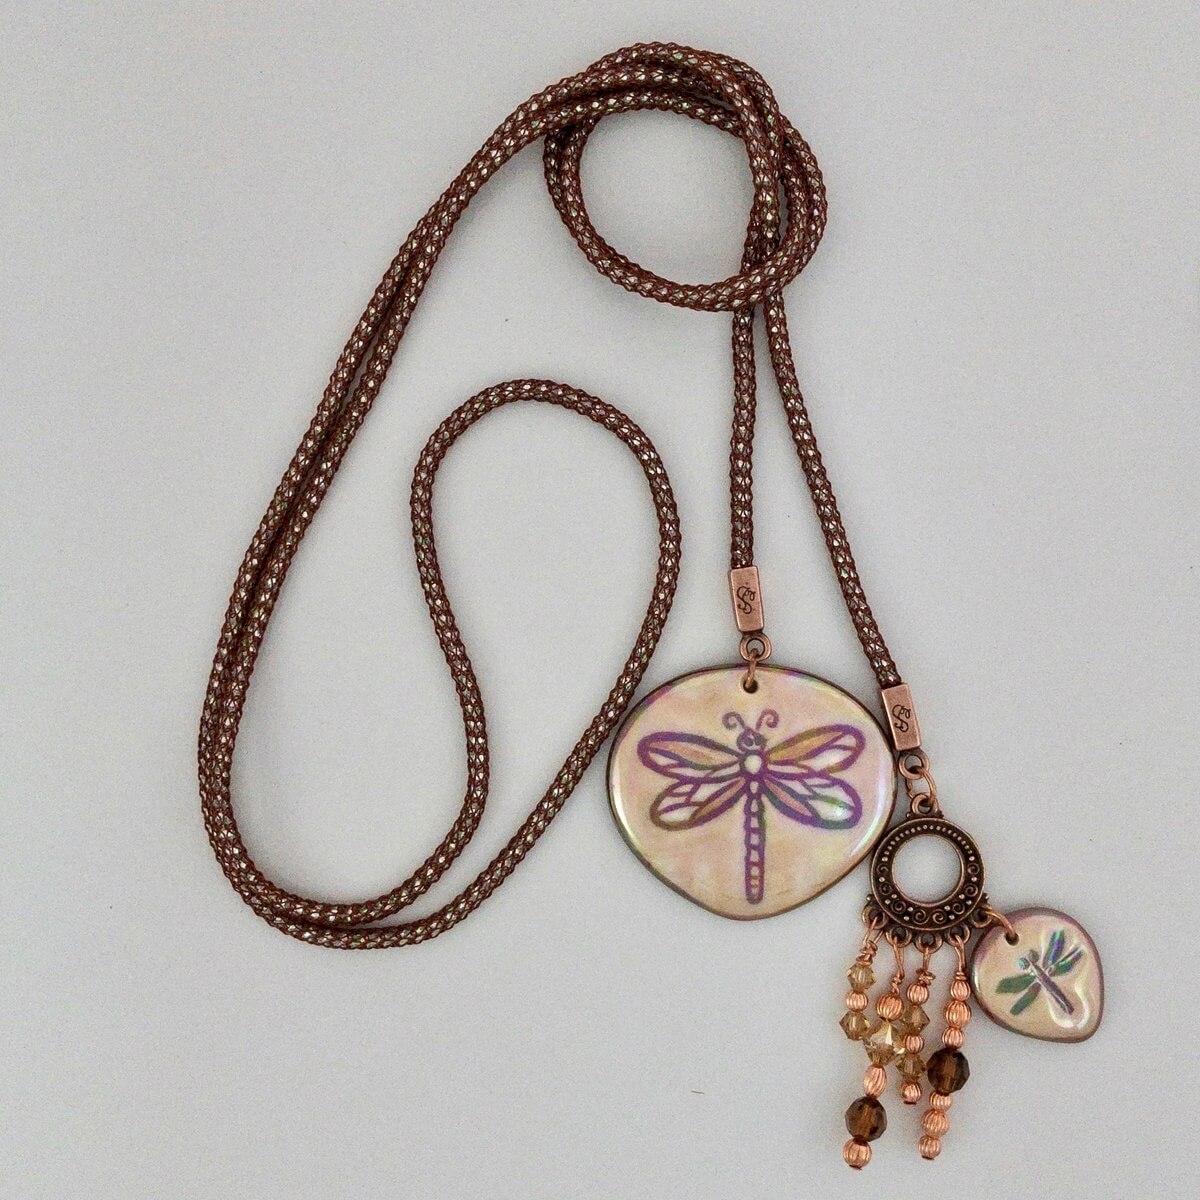 Lariat necklace with porcelain dragonfly accents.